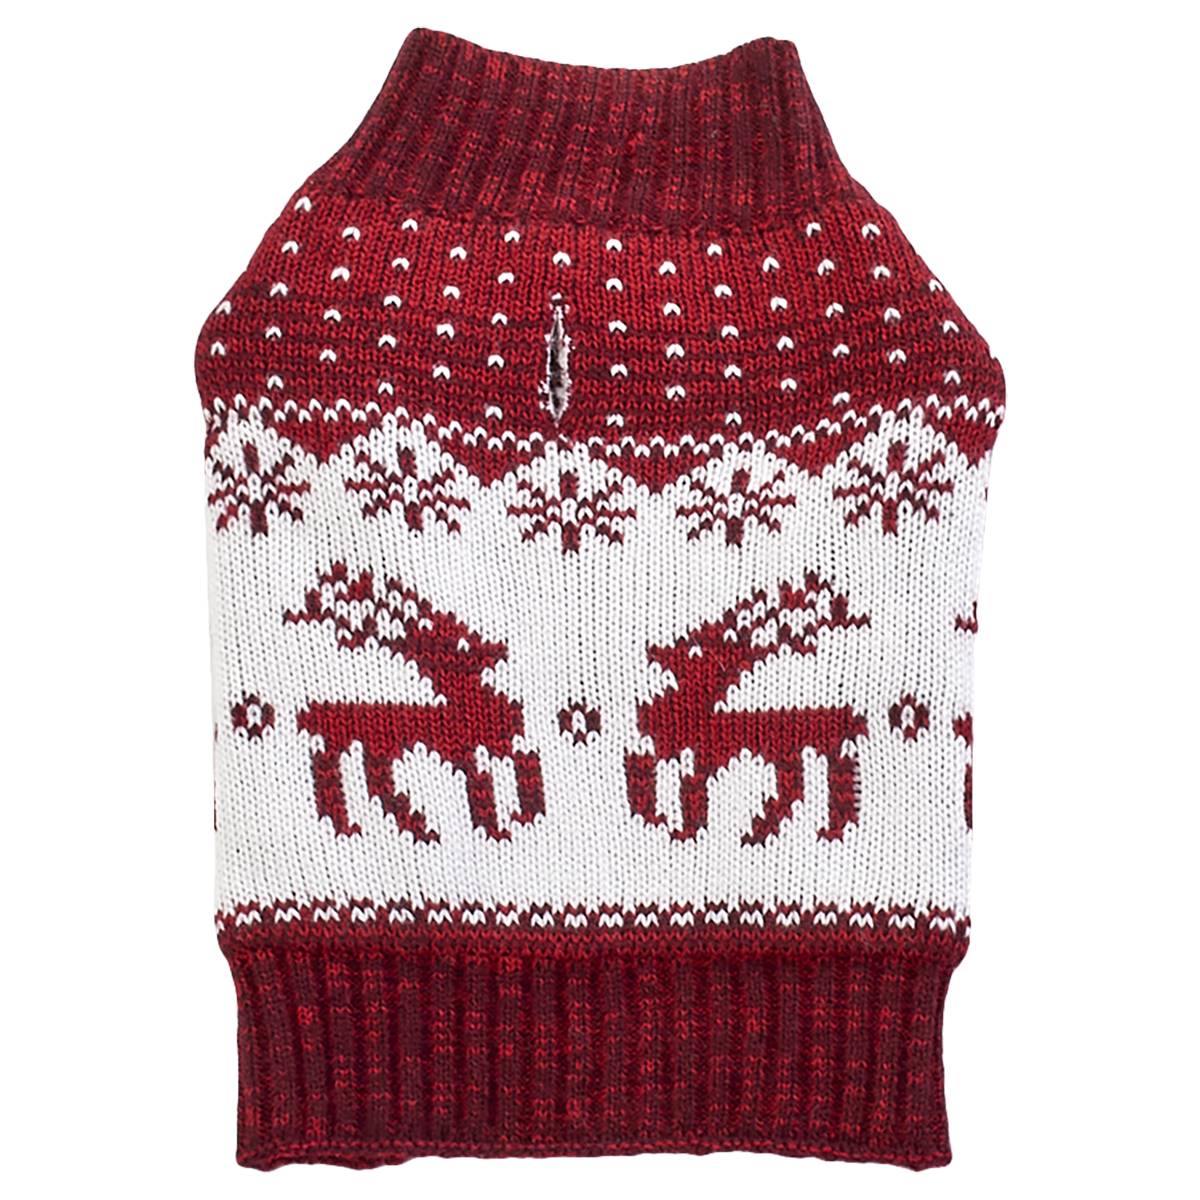 Northpaw Fair Isle Pet Sweater - Red